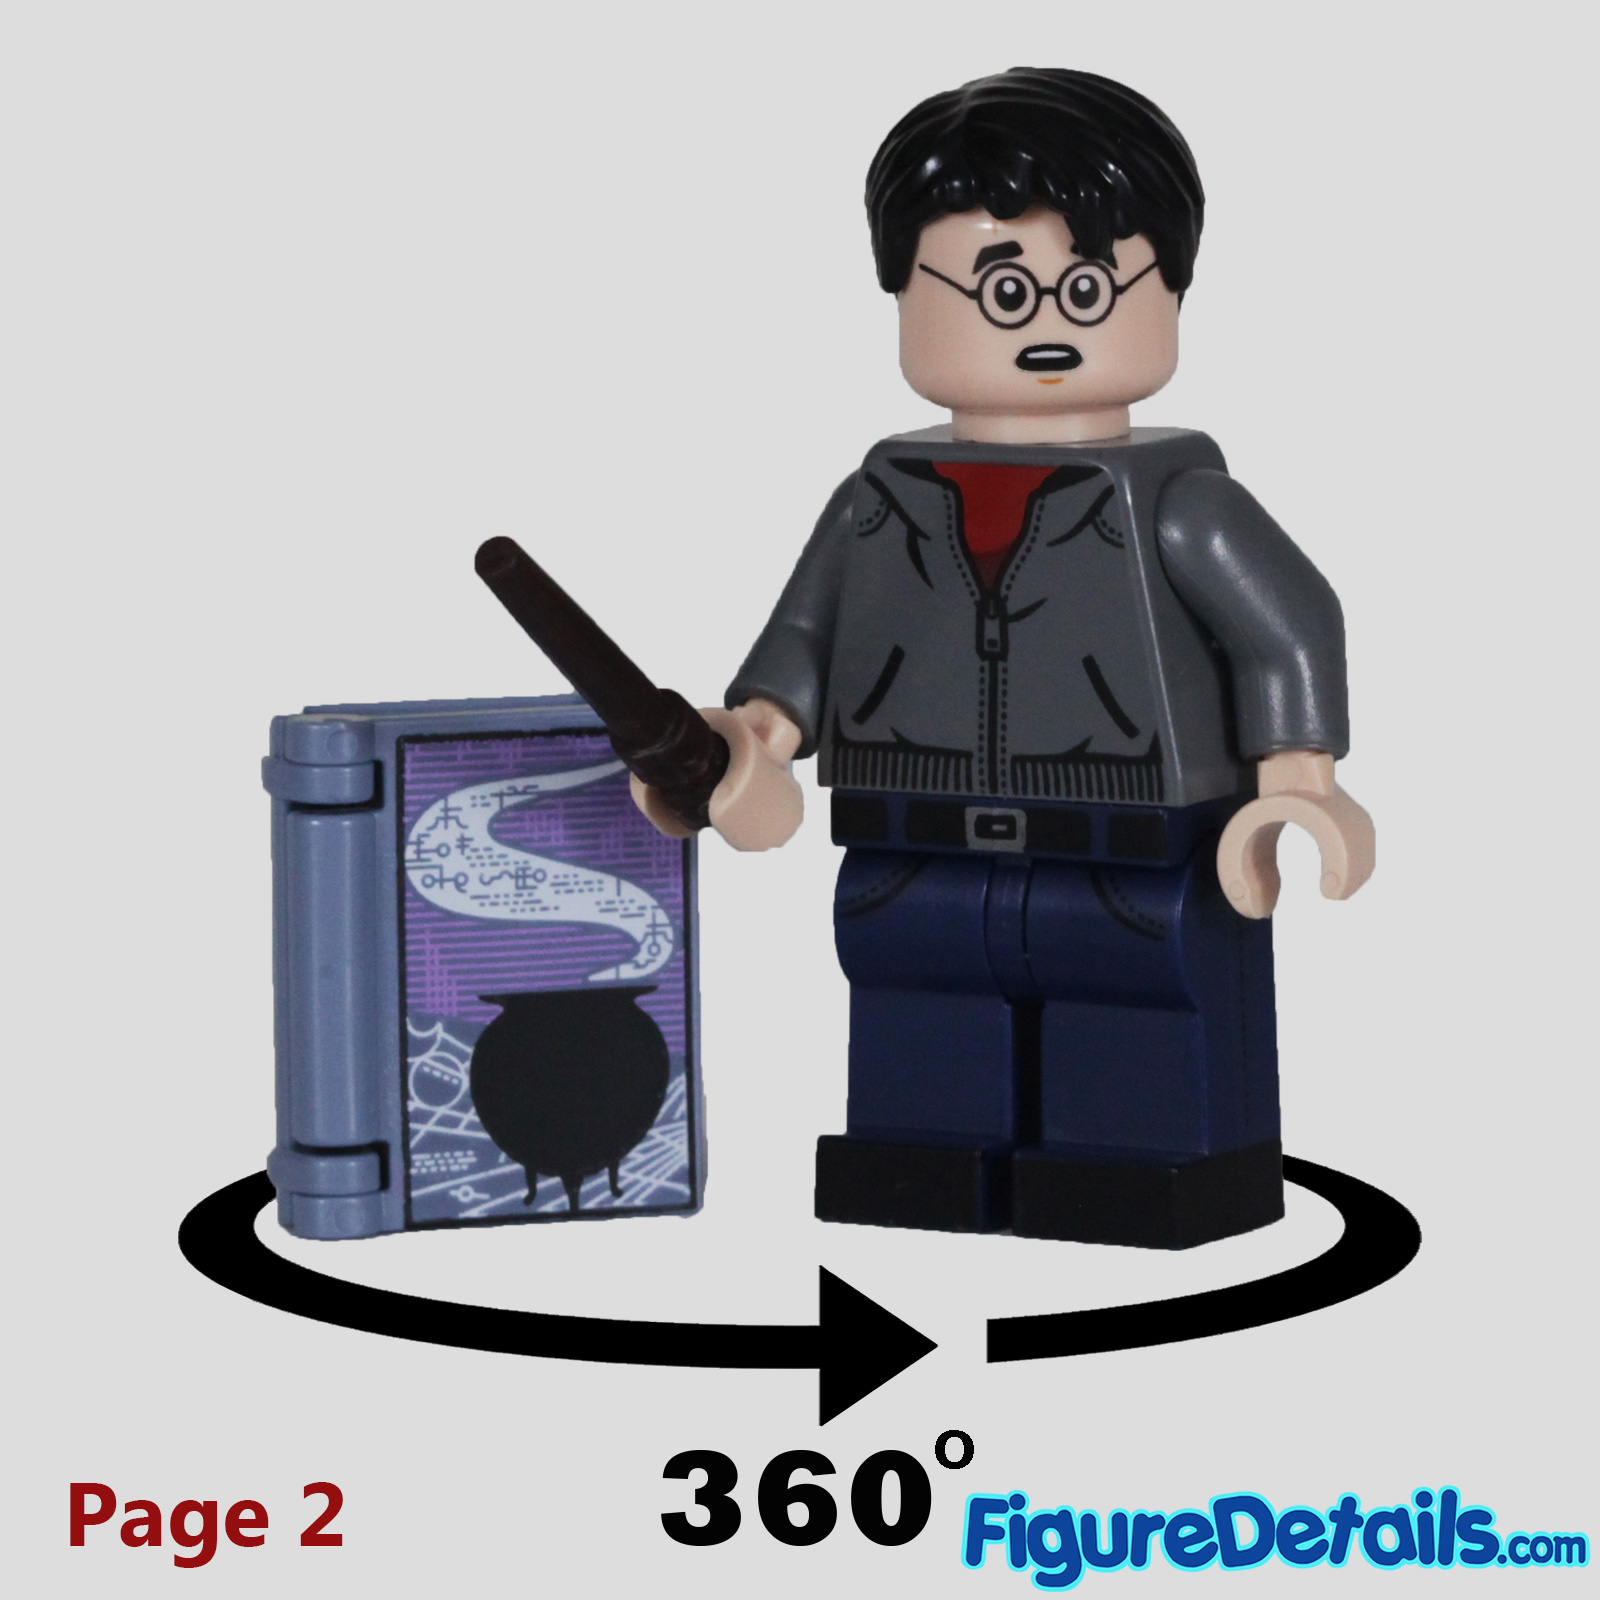 Lego Harry Potter Minifigure Review in 360 Degree - Lego Harry Potter Series 2 - 71028 7